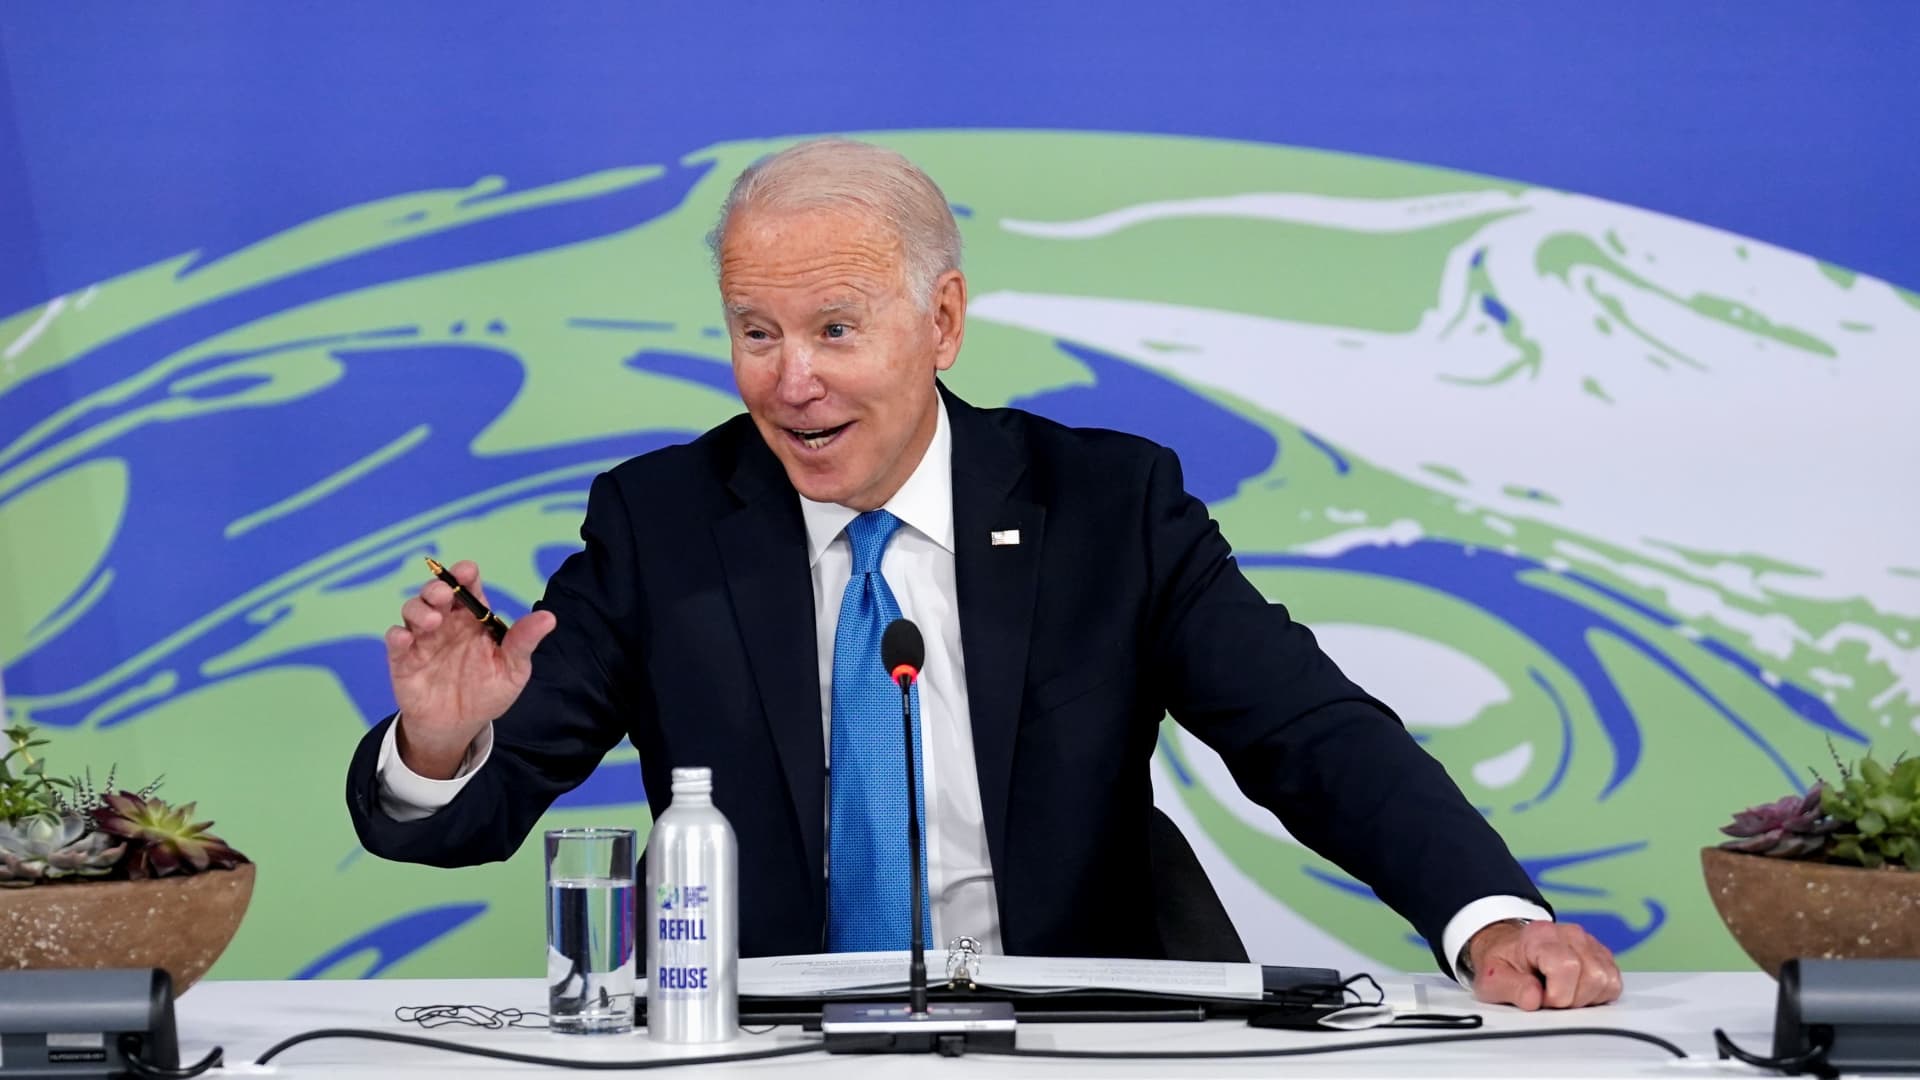 U.S. President Joe Biden participates in a meeting on the Build Back Better World (B3W) initiative during the UN Climate Change Conference (COP26) in Glasgow, Scotland, Britain, November 2, 2021.